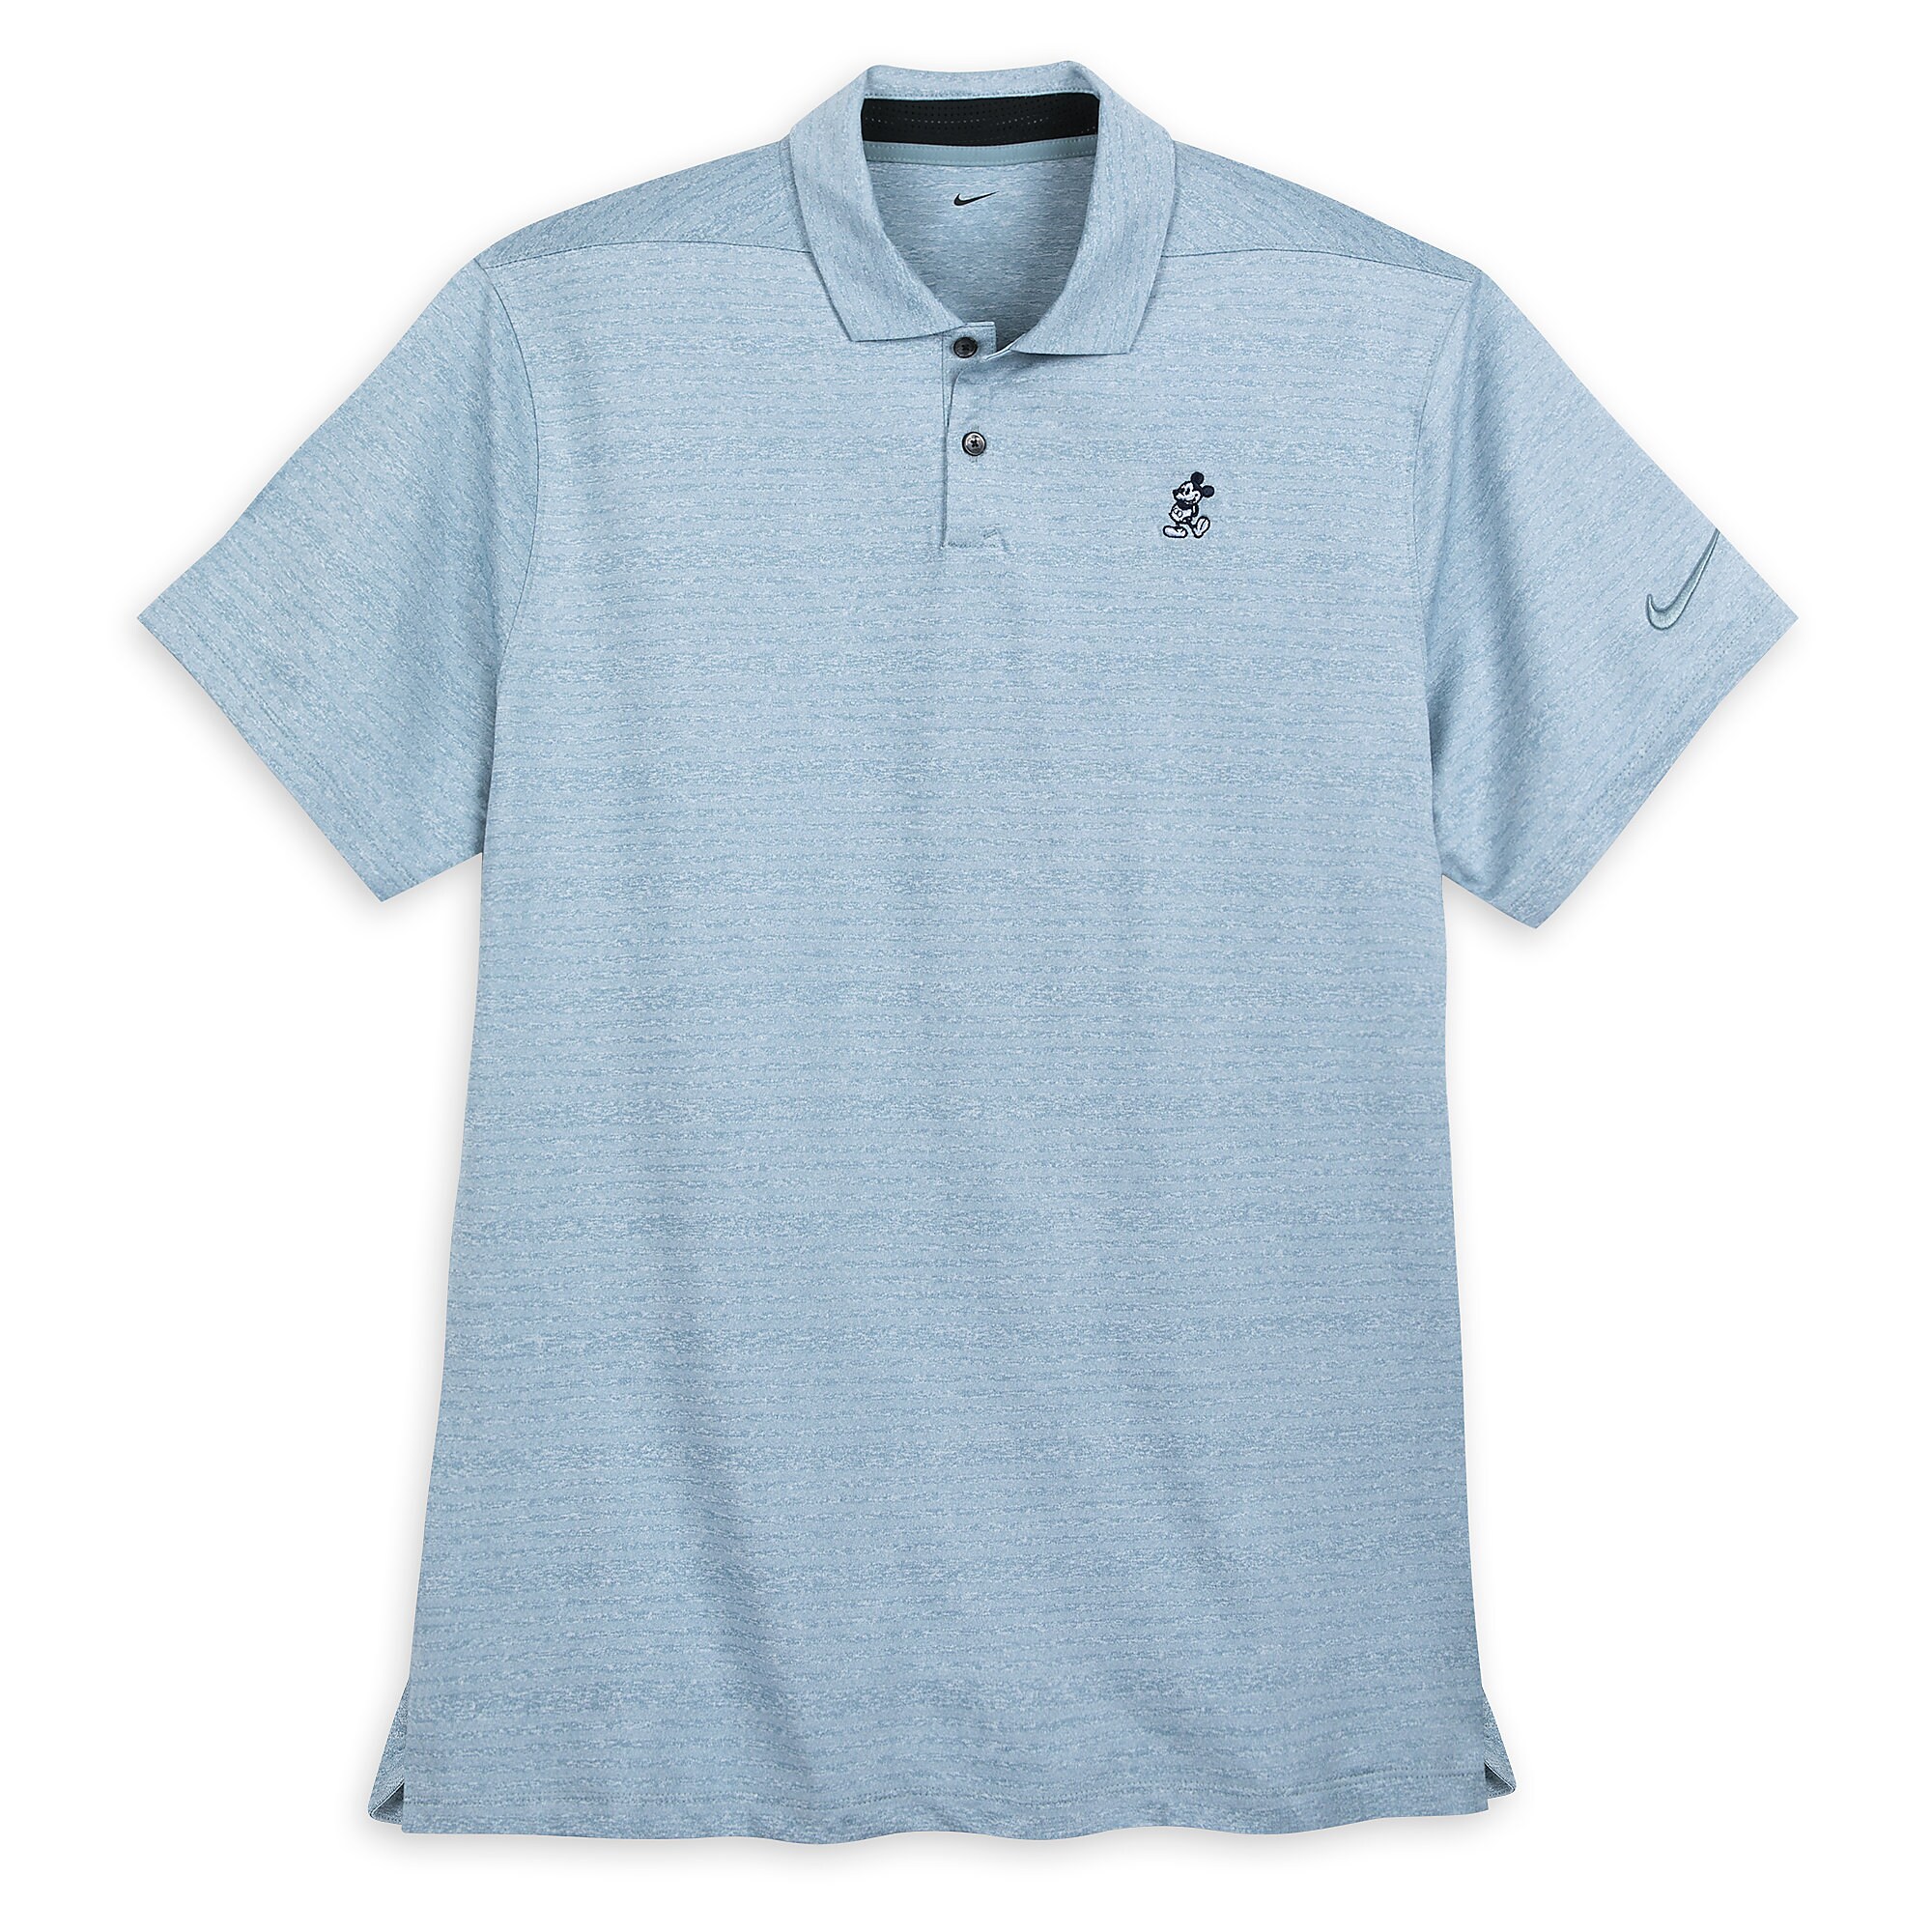 Mickey Mouse Polo for Men by Nike - Aviator Gray